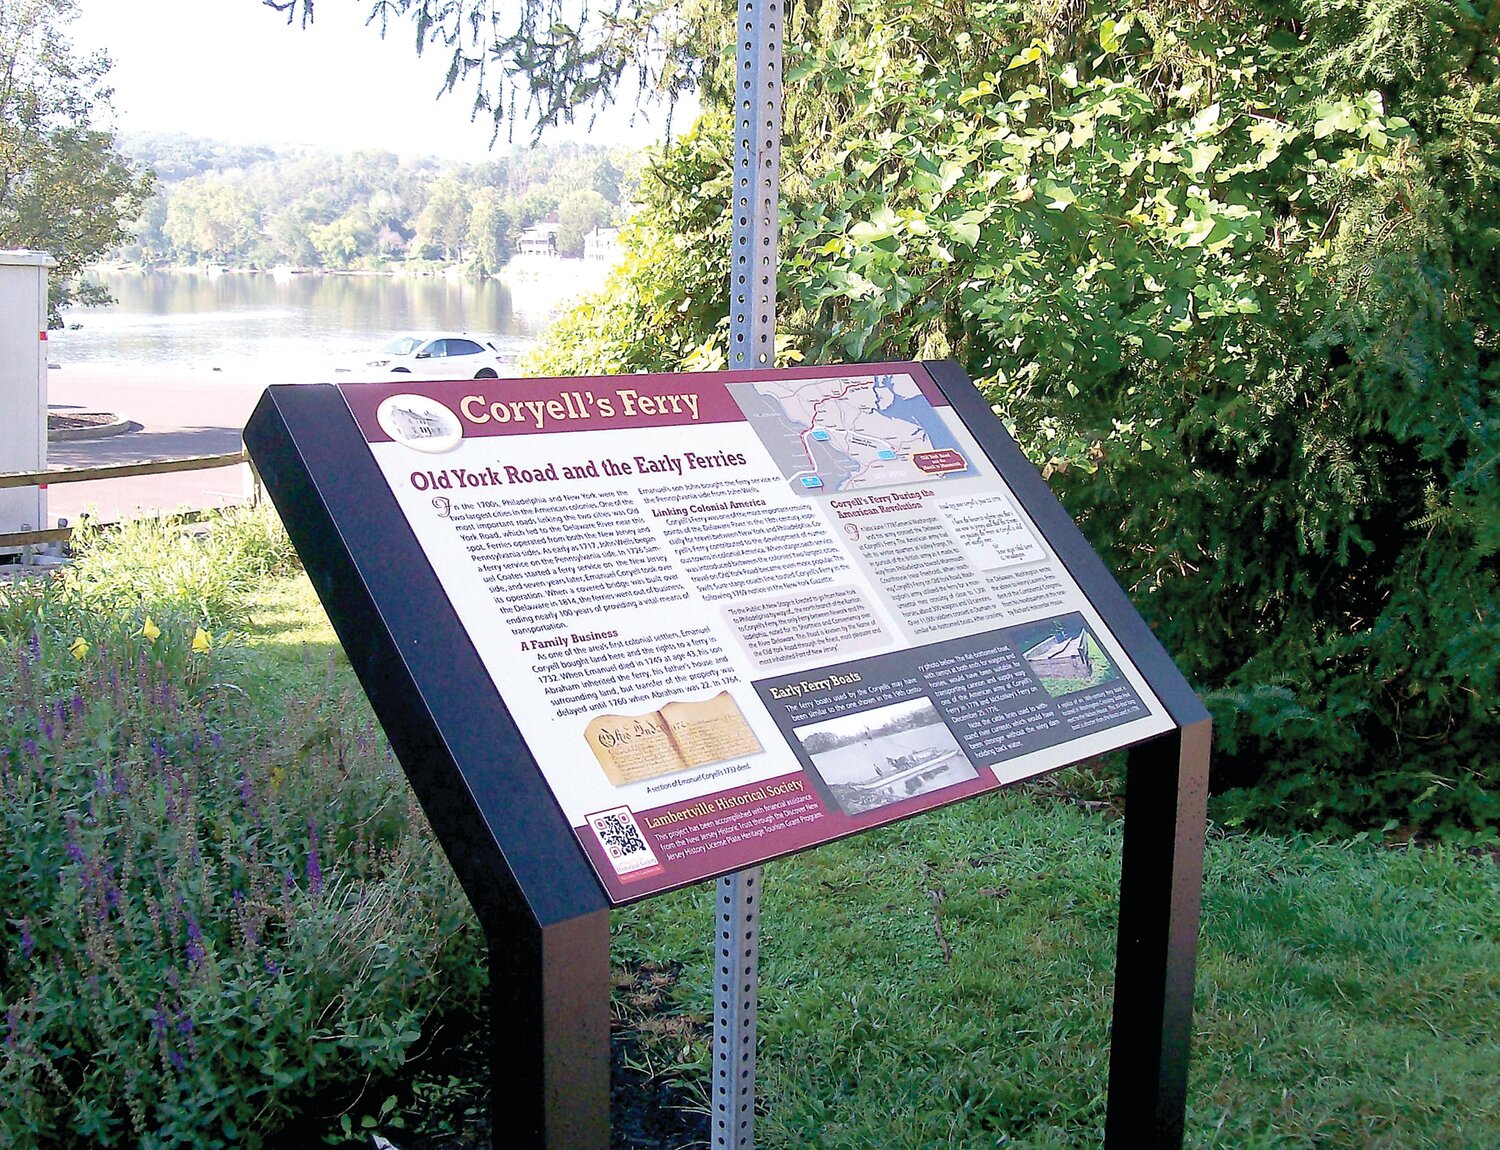 Interpretive sign for Coryell’s Ferry, erected by the Lambertville Historical Society last year near the Delaware River bridge.